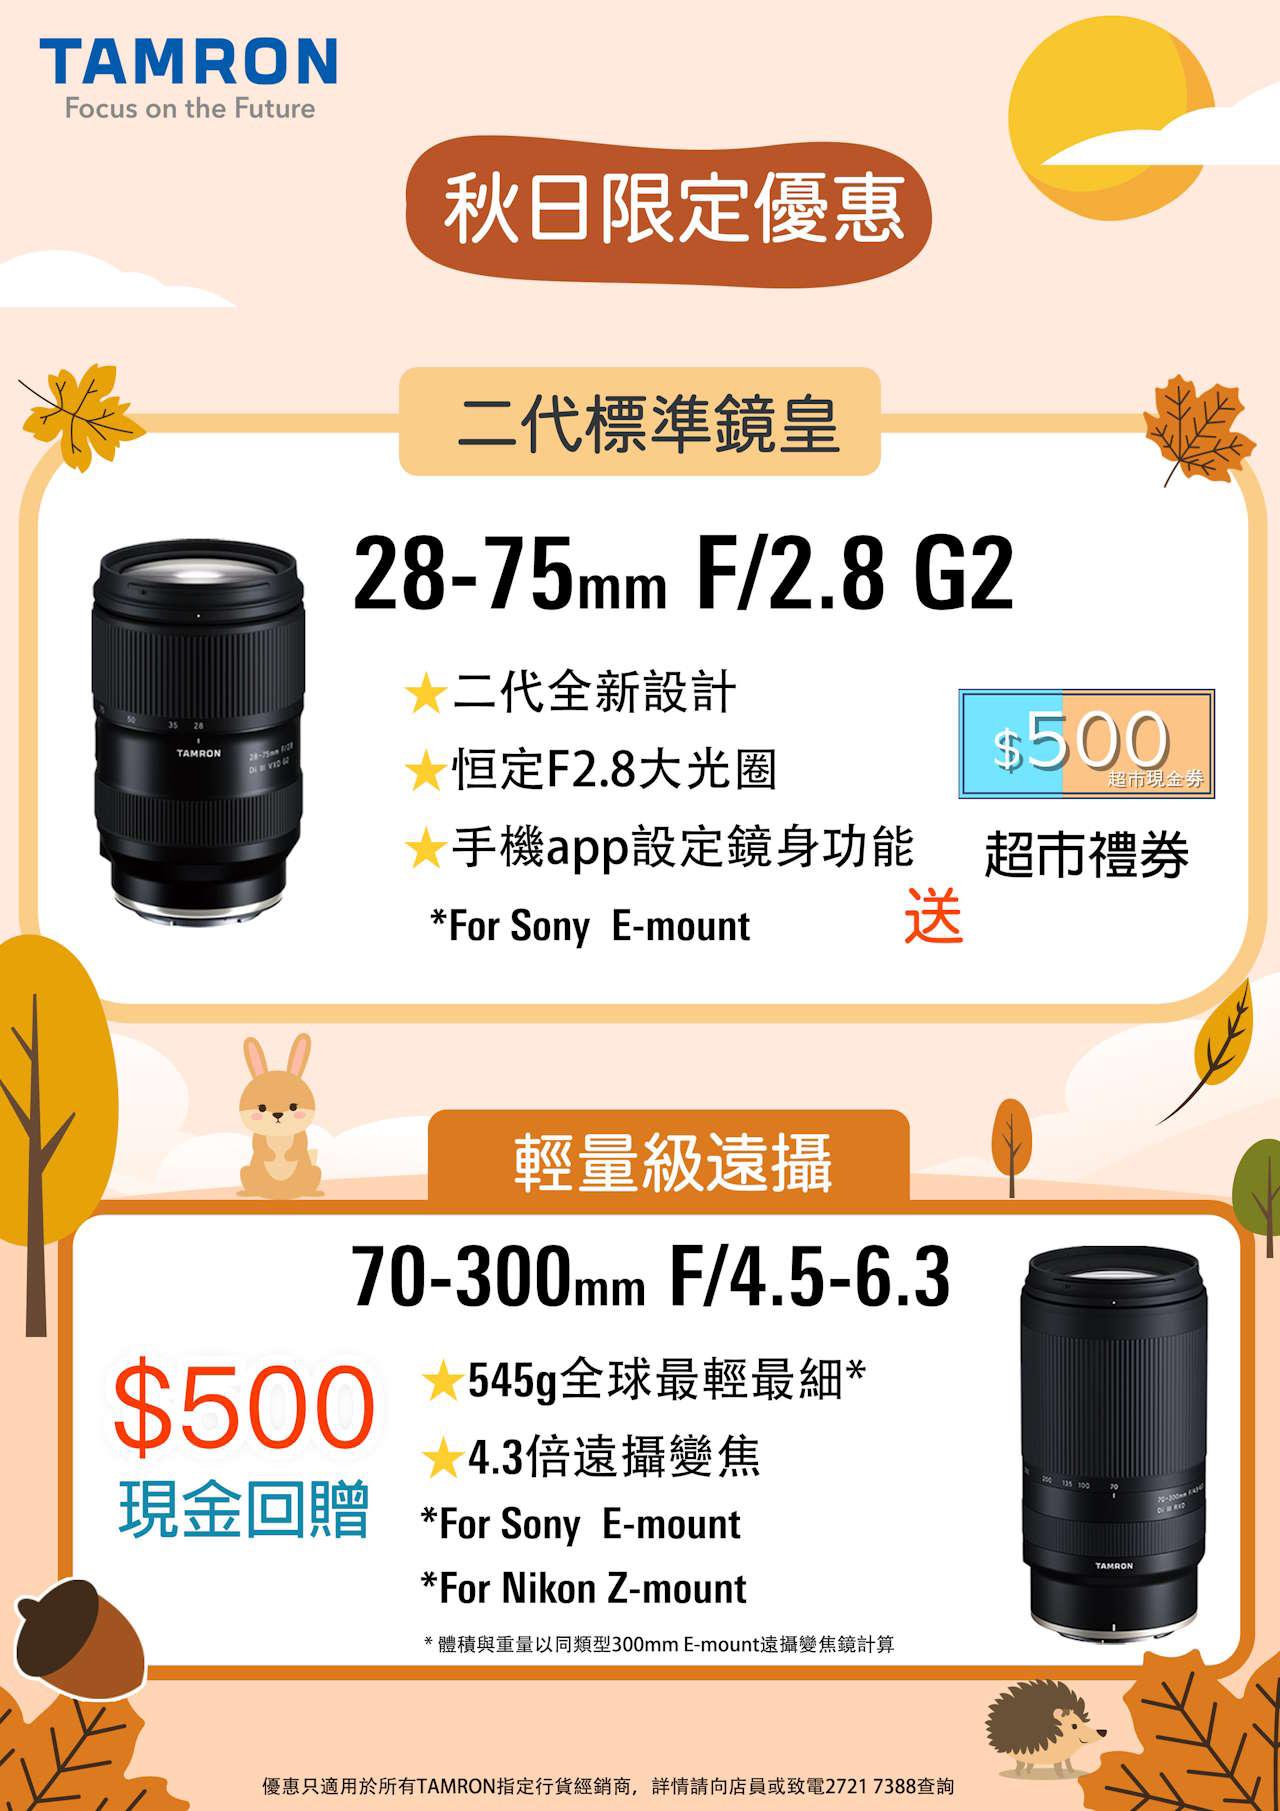 Tamron 70-300mm F/4.5-6.3 Di III RXD (A047) for Sony E 騰龍香港行貨